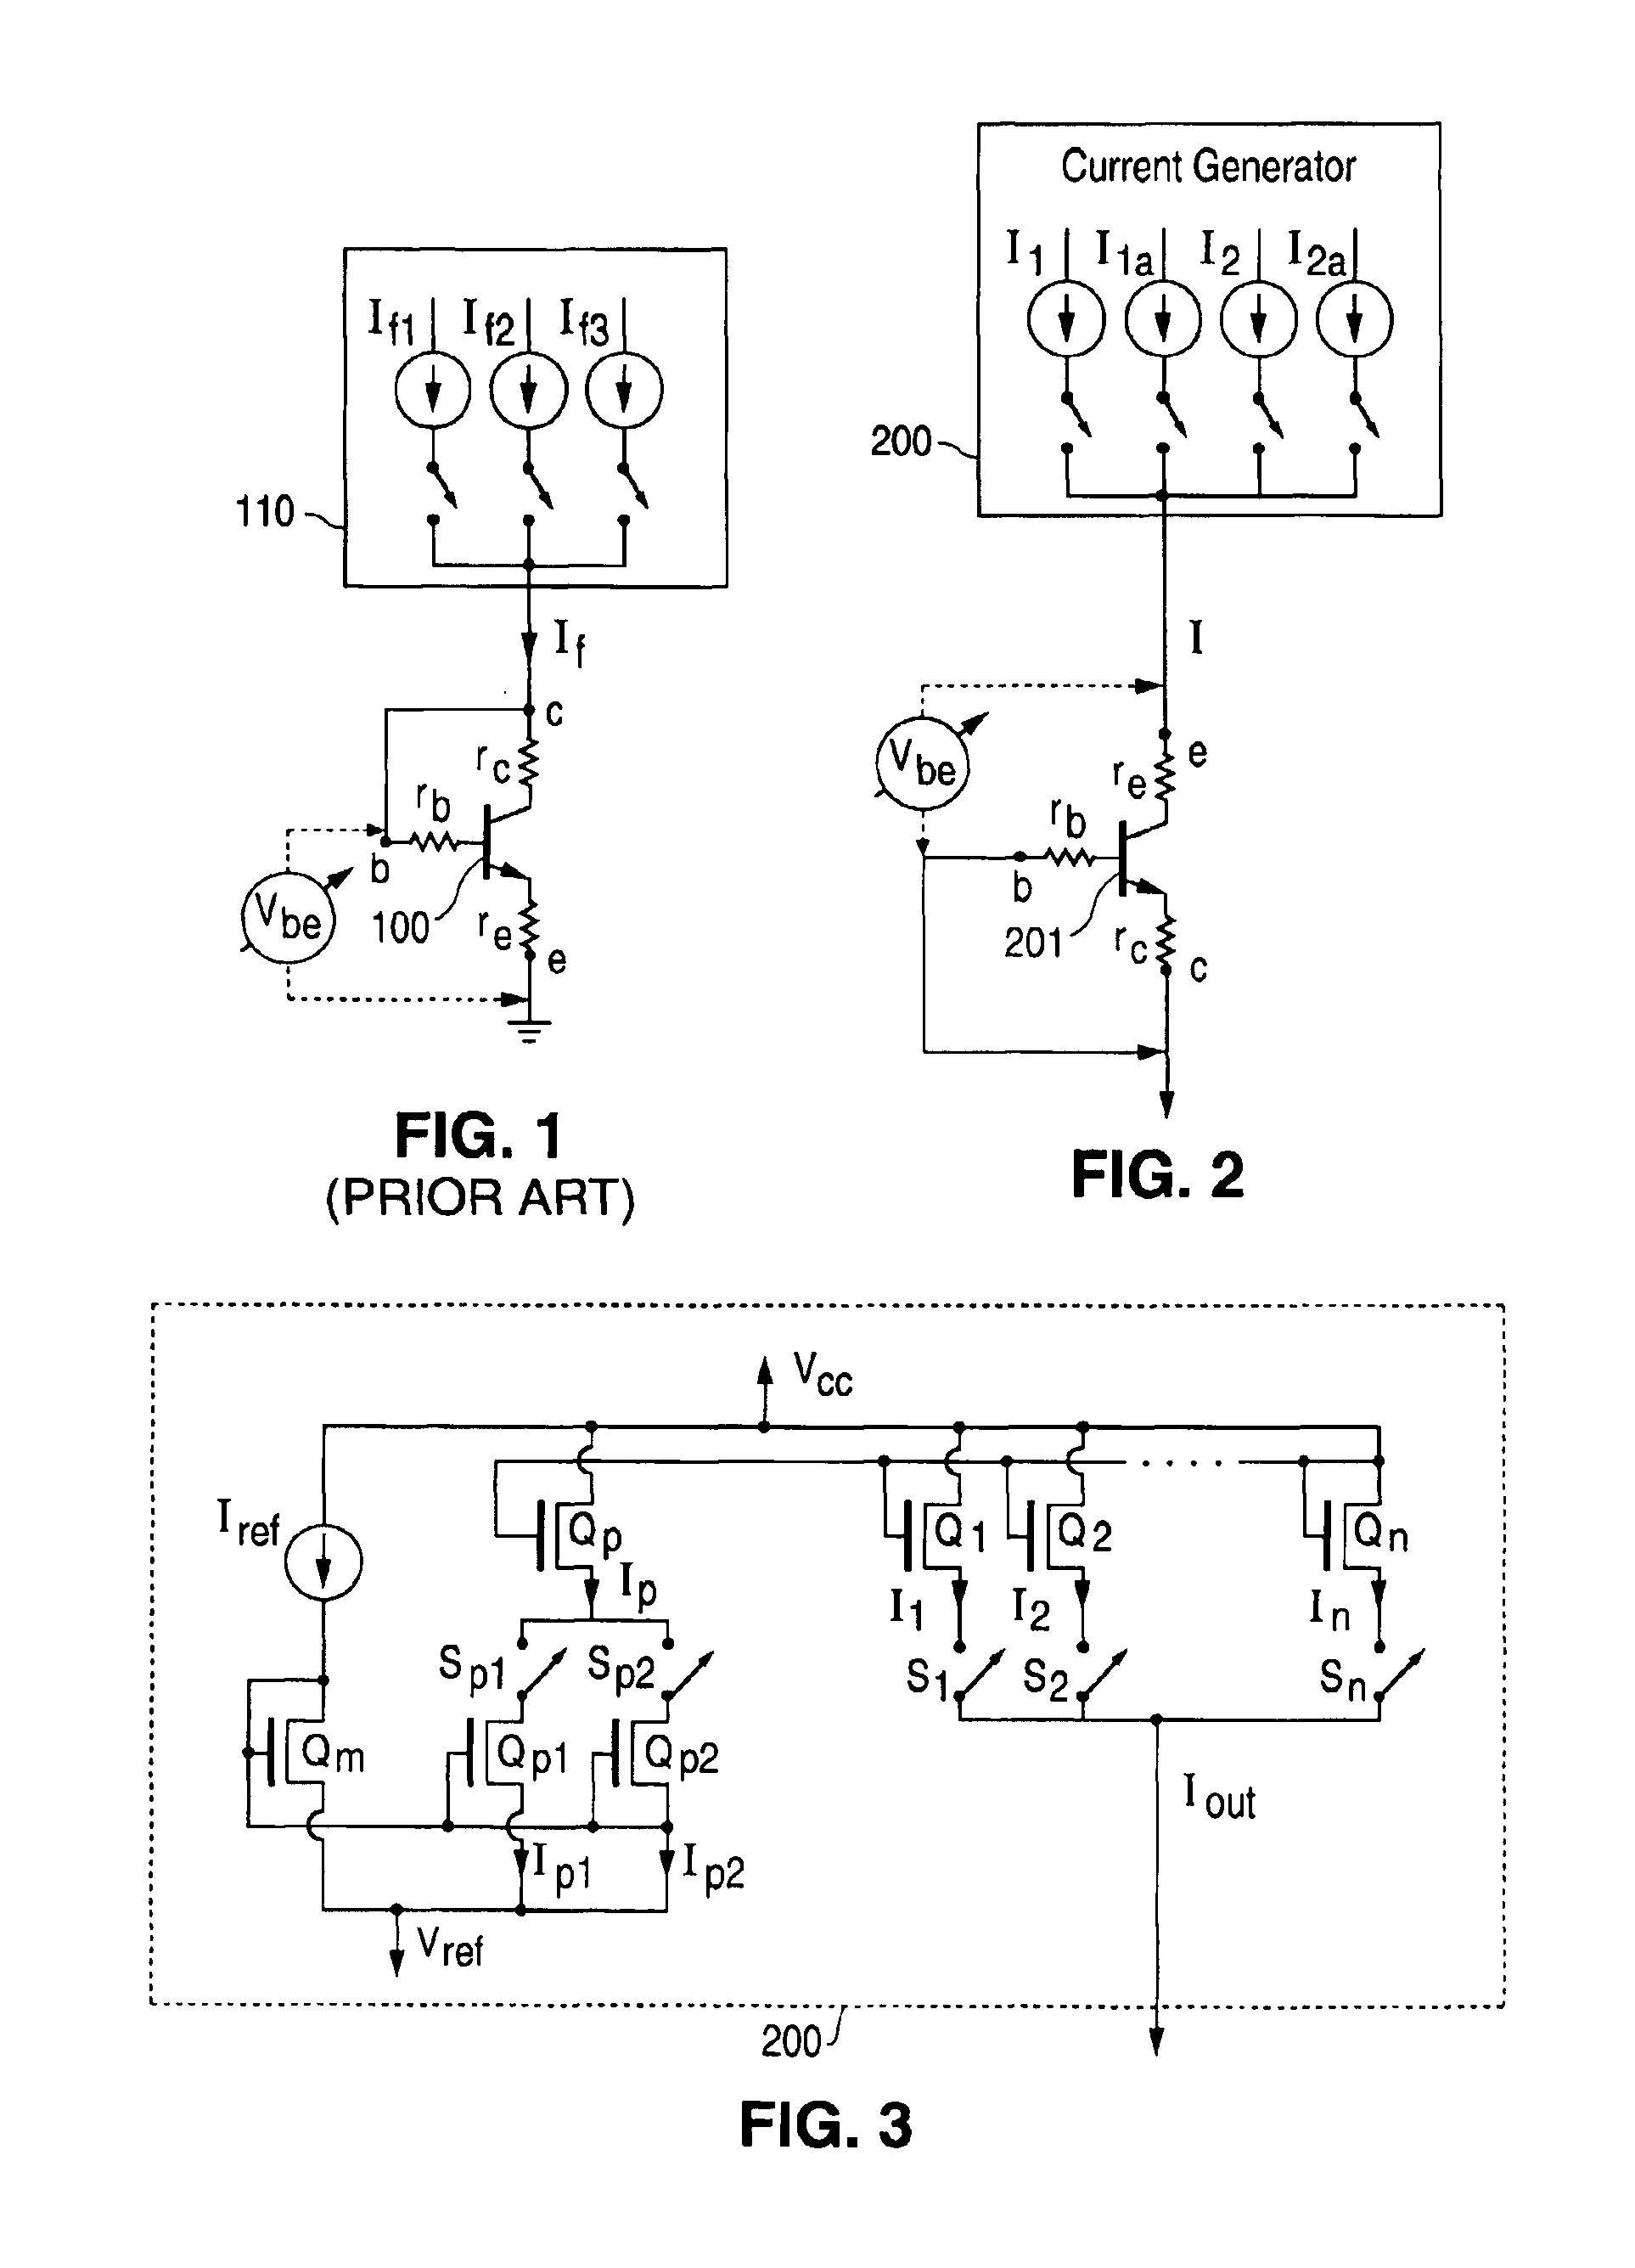 Method and apparatus for determining the temperature of a junction using voltage responses of the junction and a correction factor